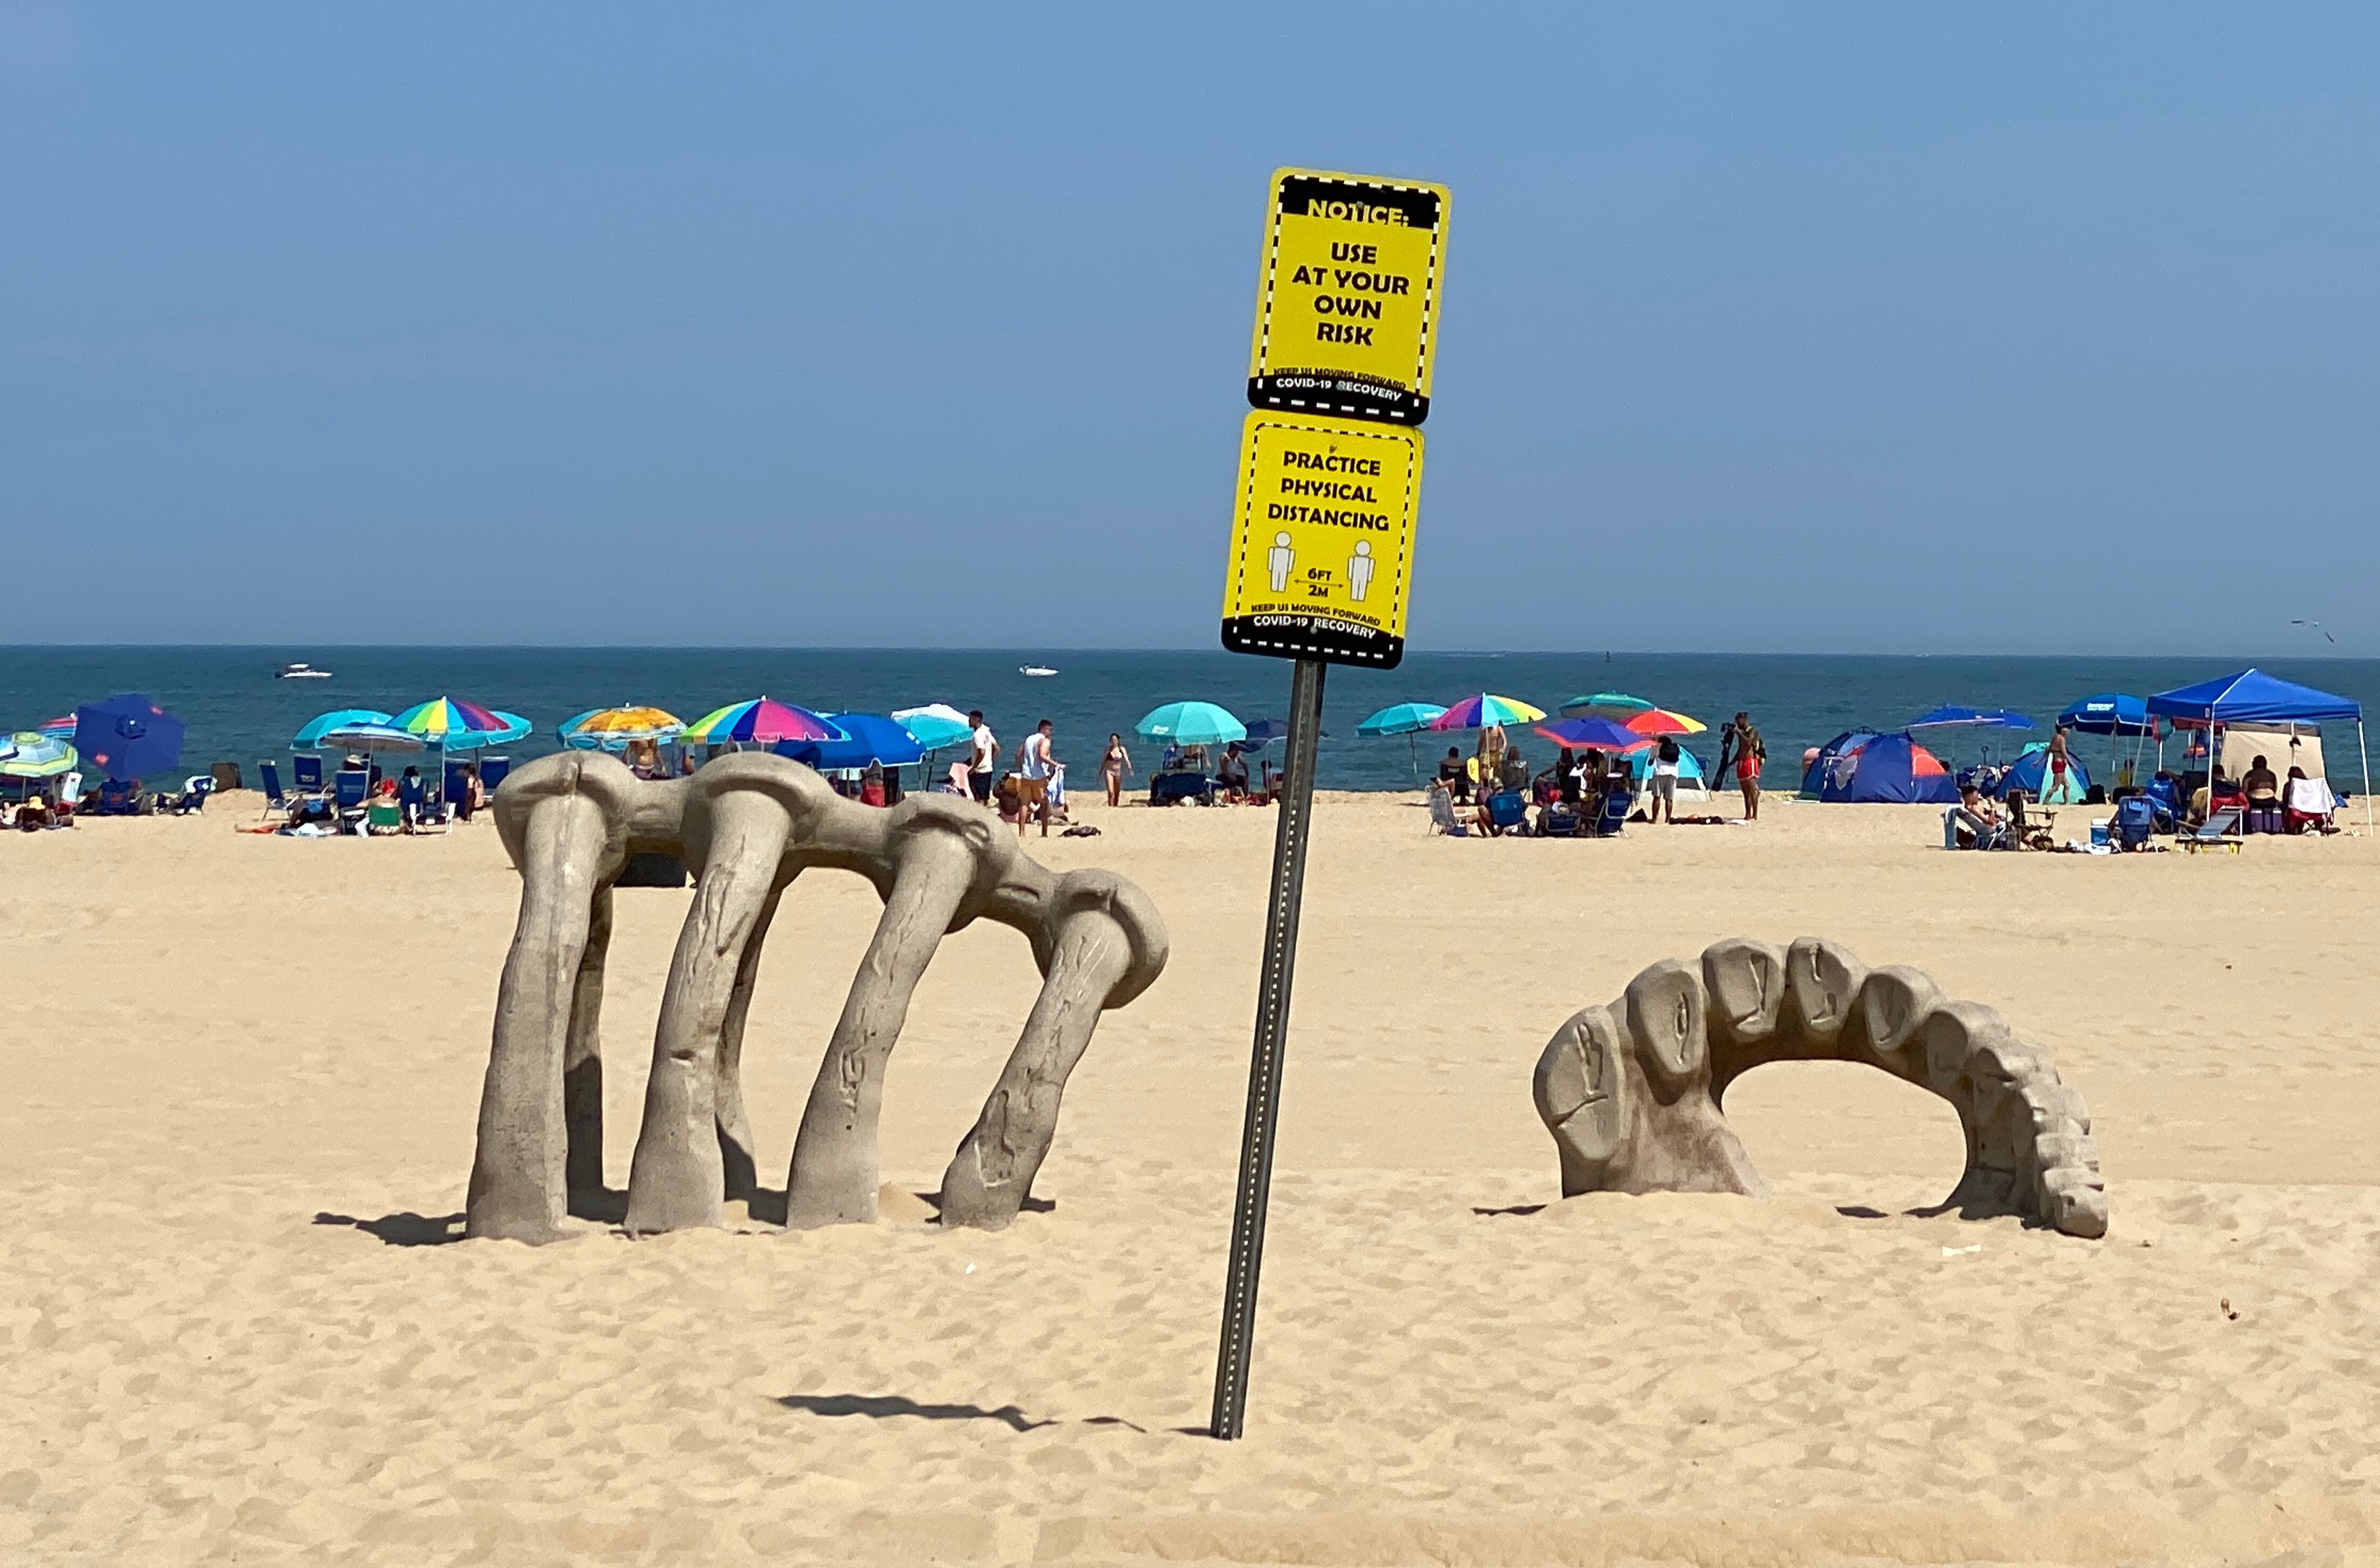 Tourist gather at the beach in Ocean City, Maryland as a sign says "Use at your own risk."